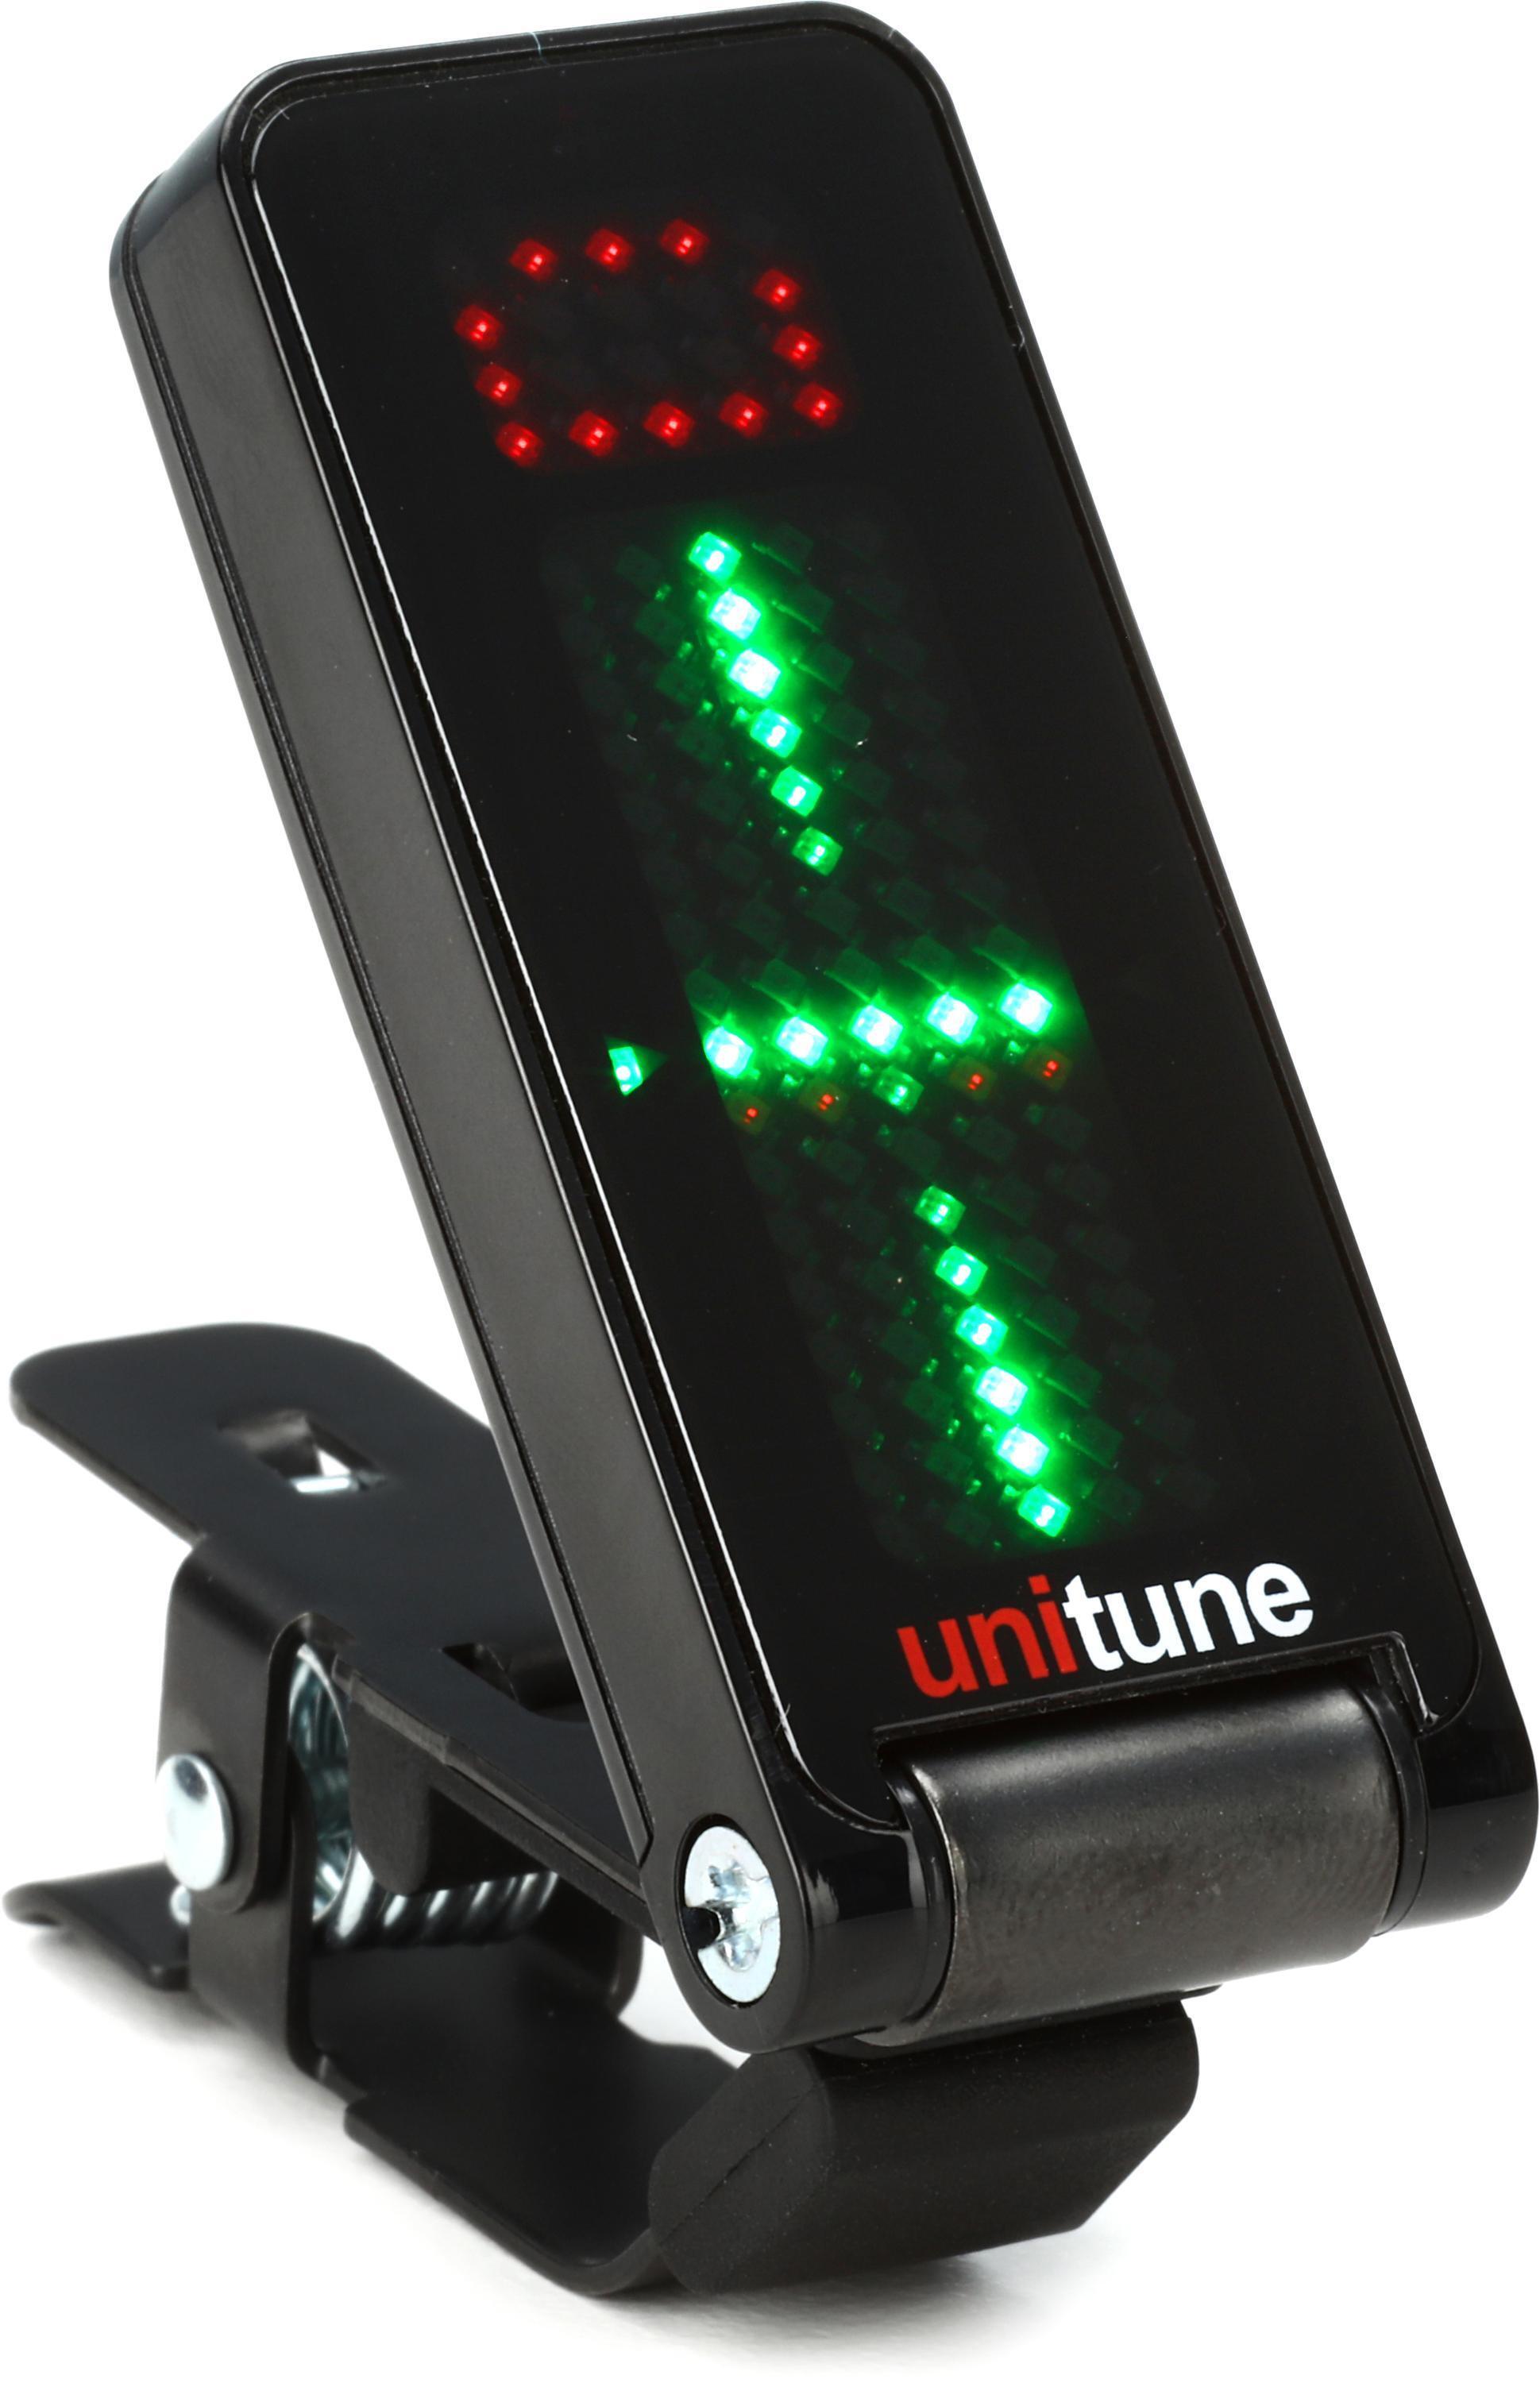 Bundled Item: TC Electronic UniTune Clip Clip-on Chromatic Tuner - Noir Sweetwater Exclusive